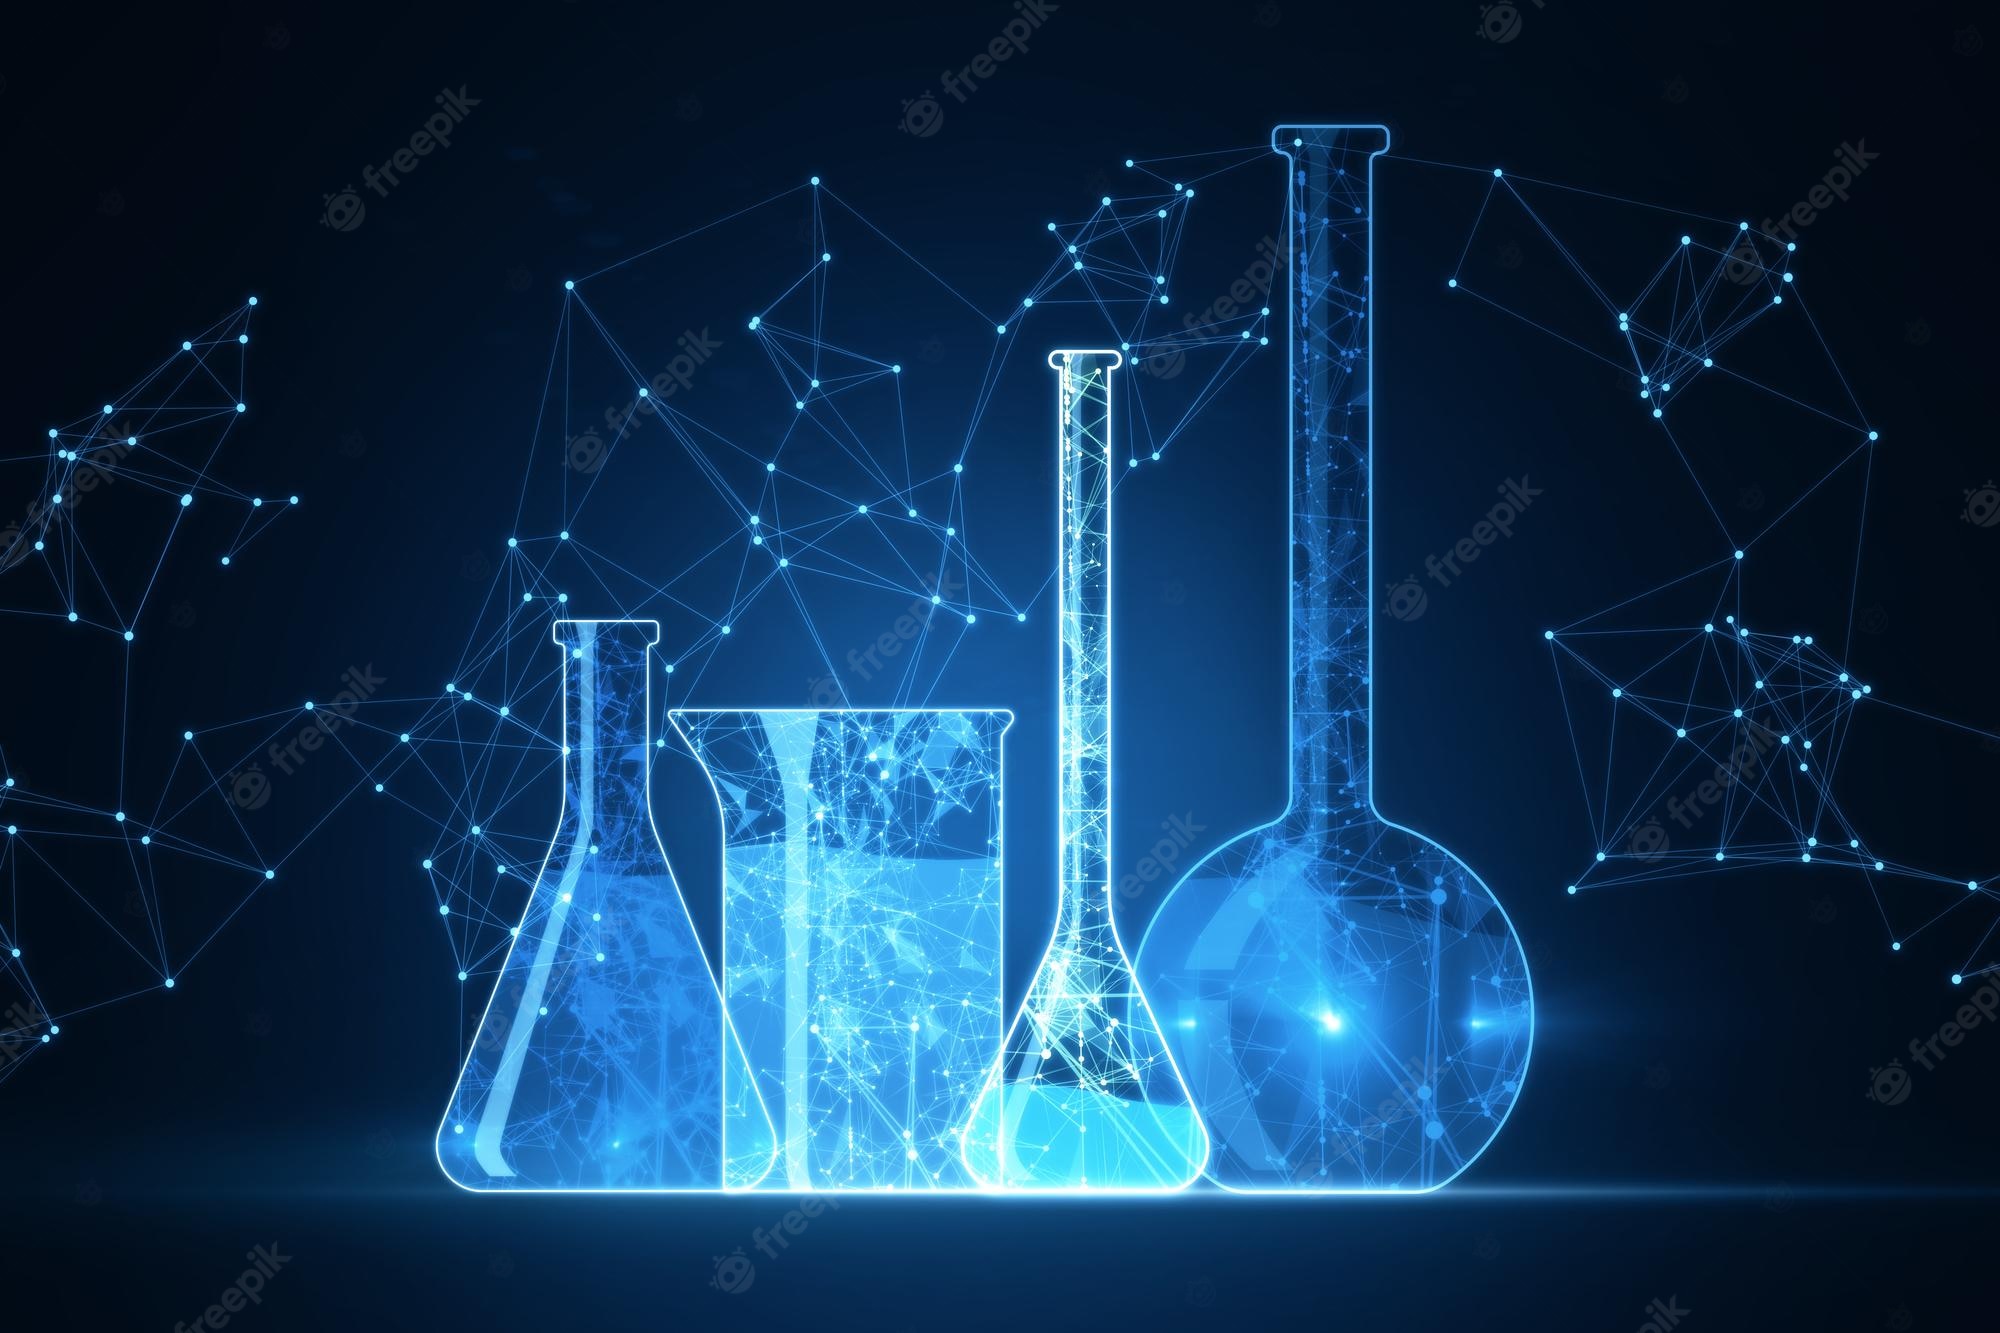 Premium Photo. Blue scientific wallpaper with low poly network and flasks genetic research genetic engineering dna genome modern medicine and biotechnology human cell biology 3D rendering